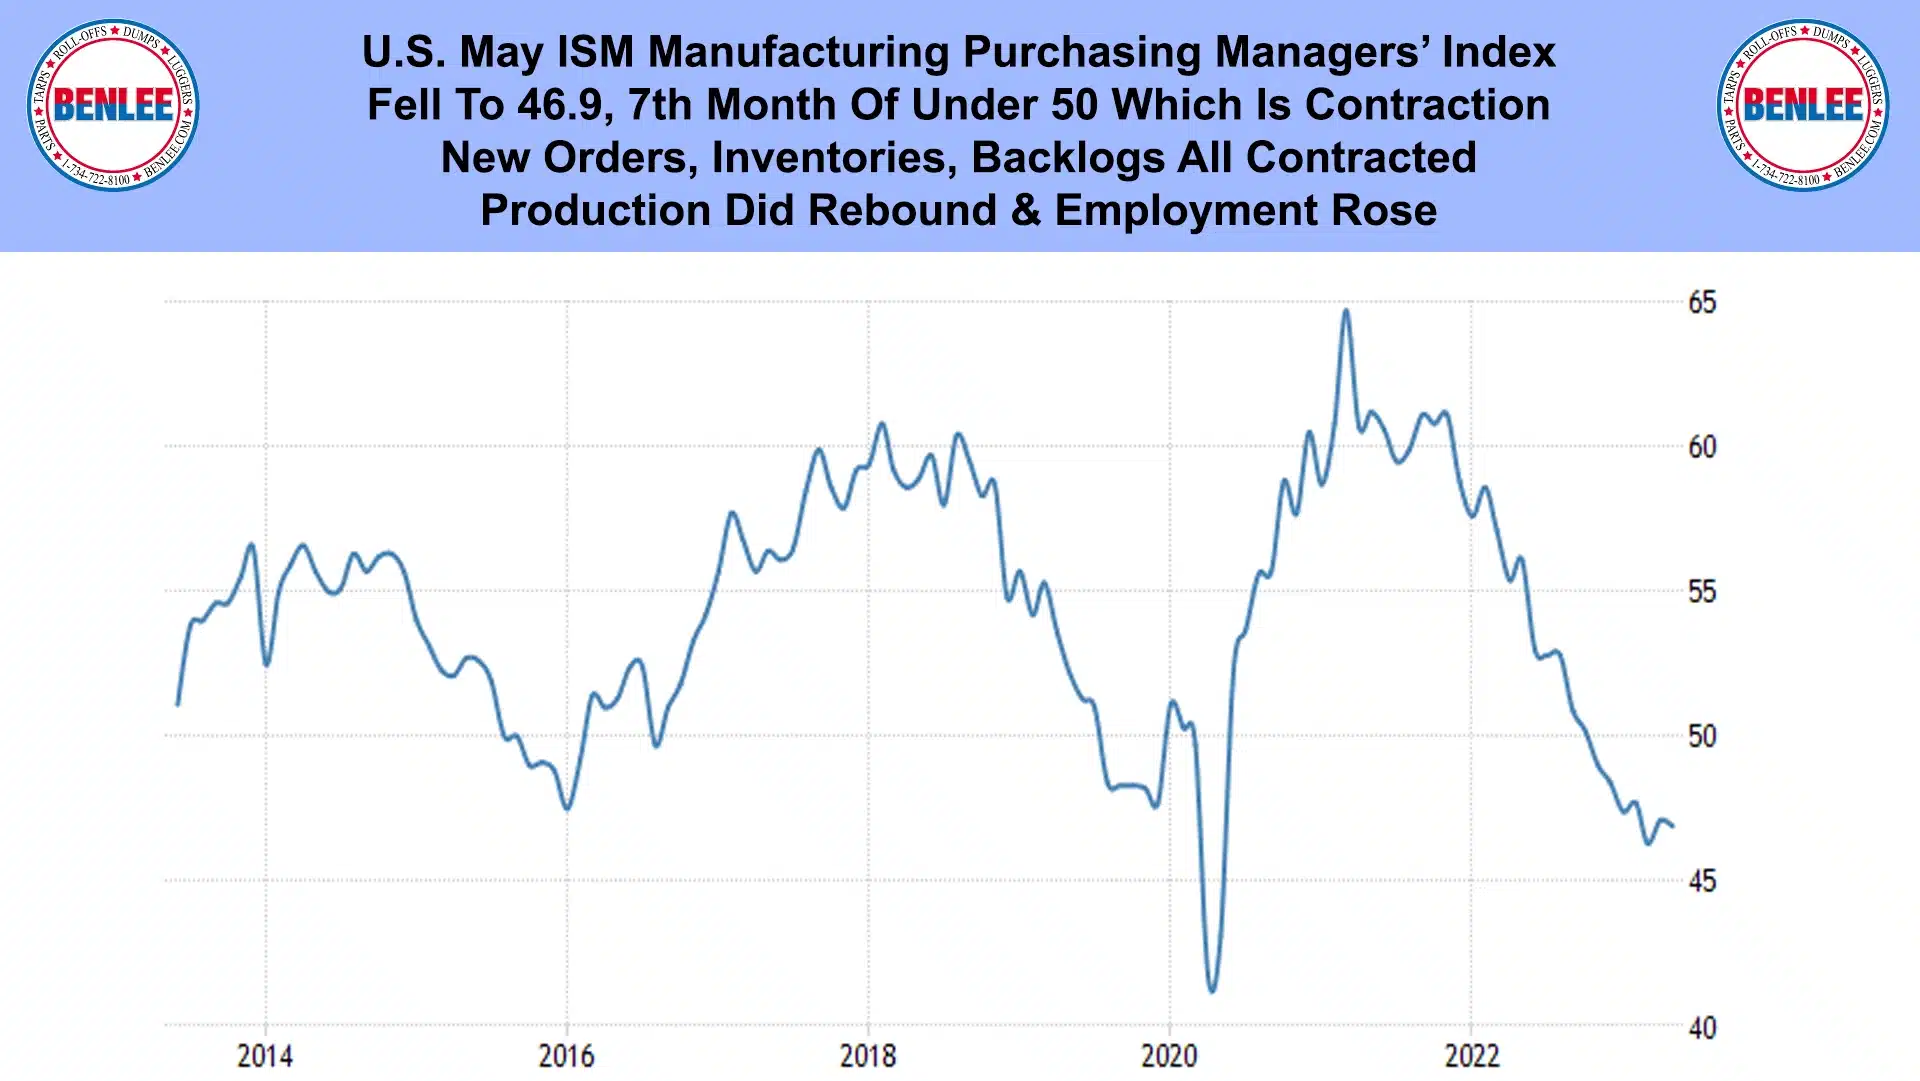 U.S. May ISM Manufacturing Purchasing Managers' Index